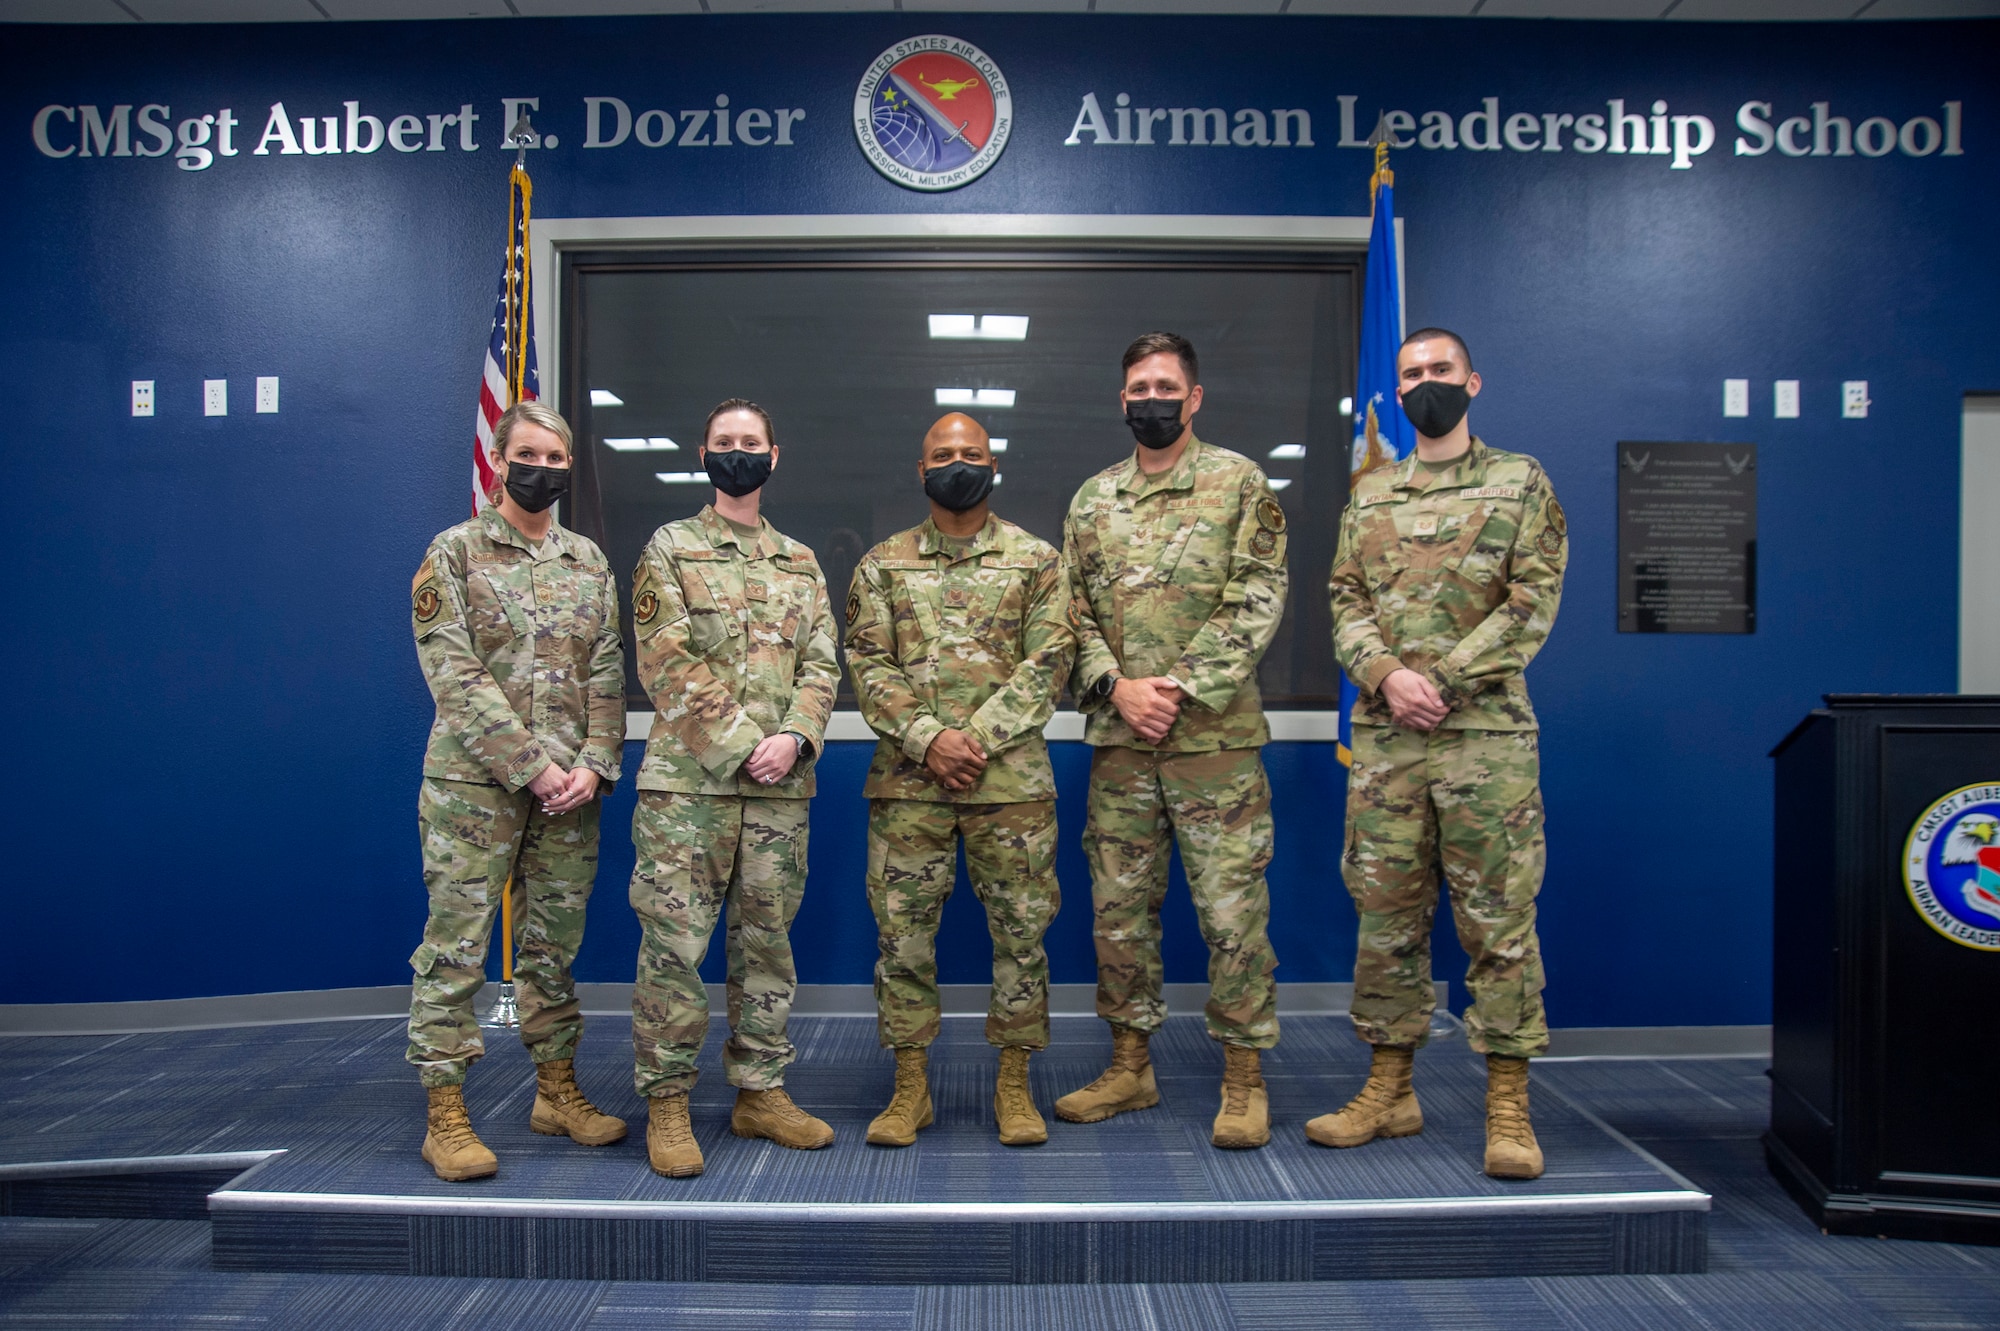 The Airman Leadership School (ALS) commandant and instructors pose for a photo in the Chief Master Sgt. Aubert E. Dozier ALS on March 1, 2022, at MacDill Air Force Base, Florida. The MacDill ALS team was recently nominated as the Air Mobility Command’s ALS of the Year and will compete against other major commands across the Air Force for ALS of the Year. (U.S. Air Force photo by Senior Airman David D. McLoney)